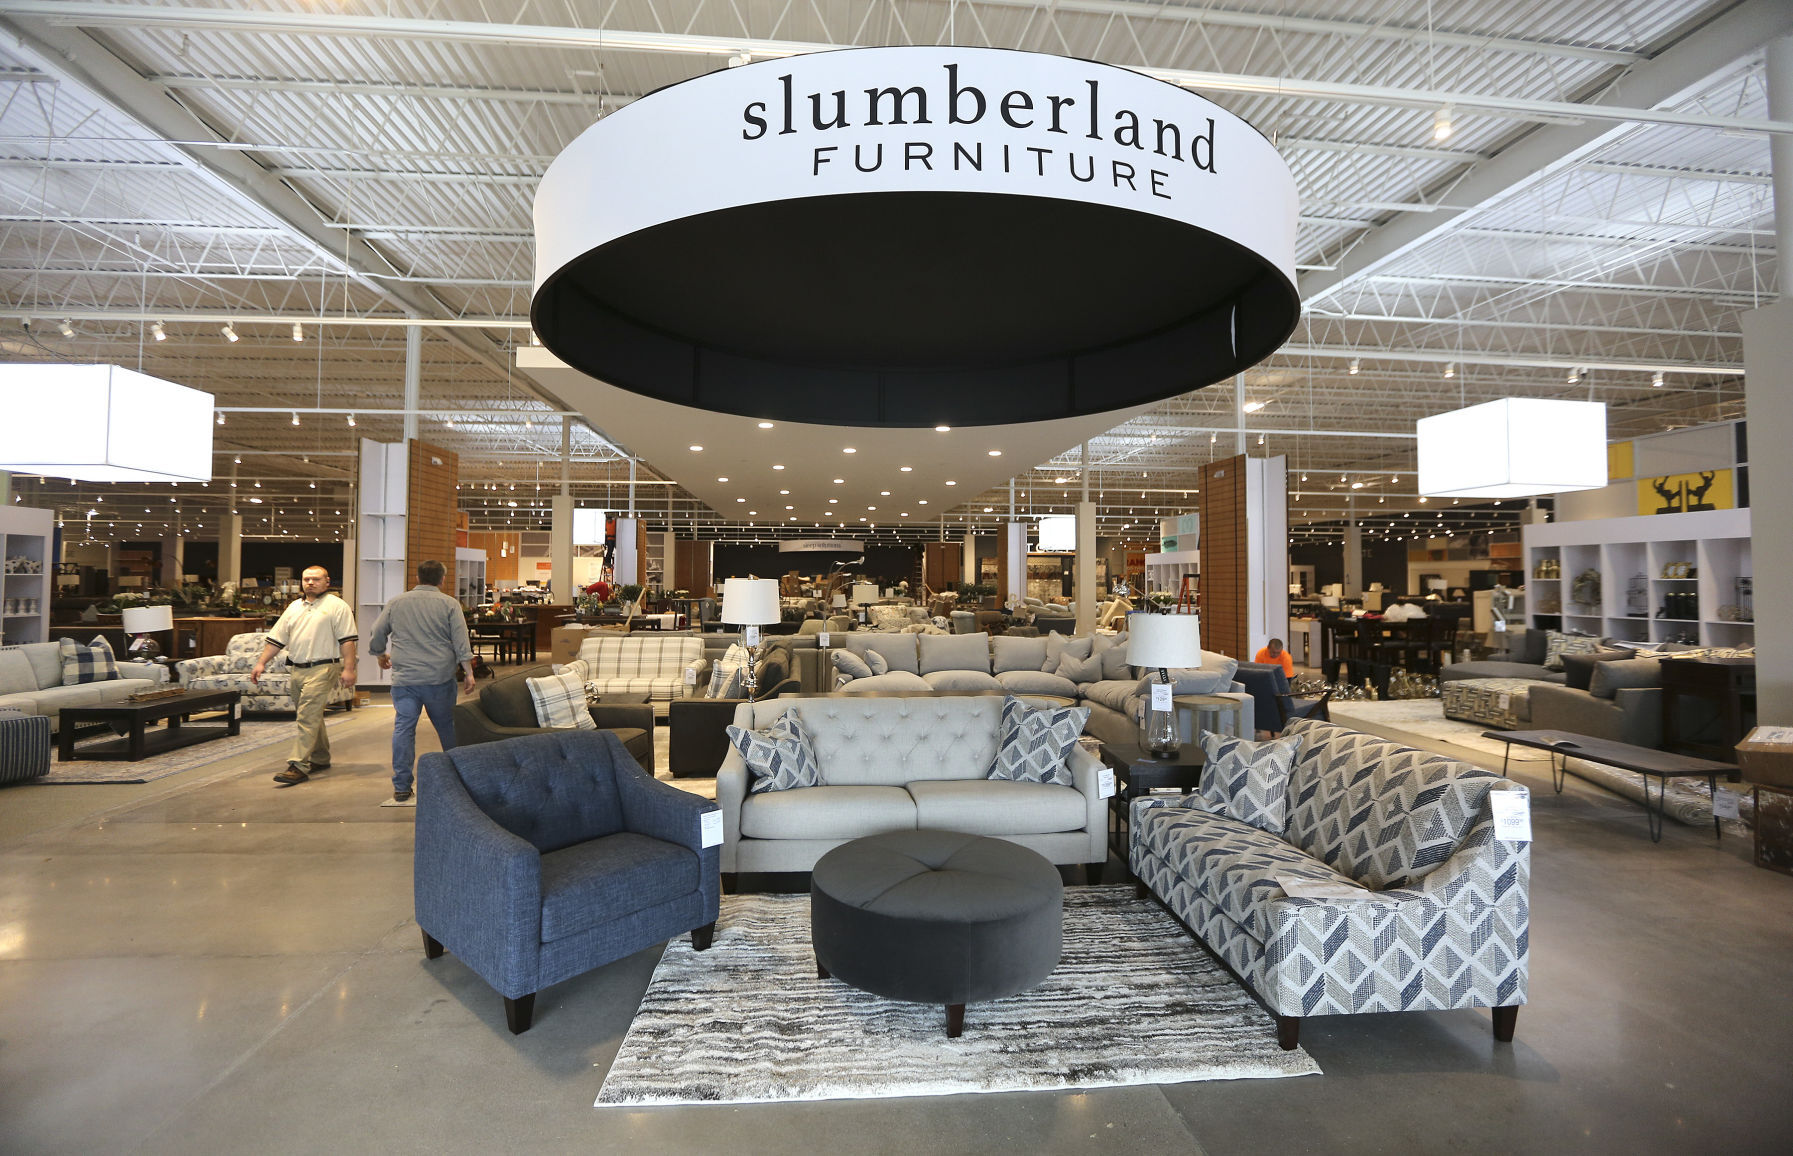 Slumberland, now located in Plaza 20, will be opening on Saturday, March 27. PHOTO CREDIT: Dave Kettering